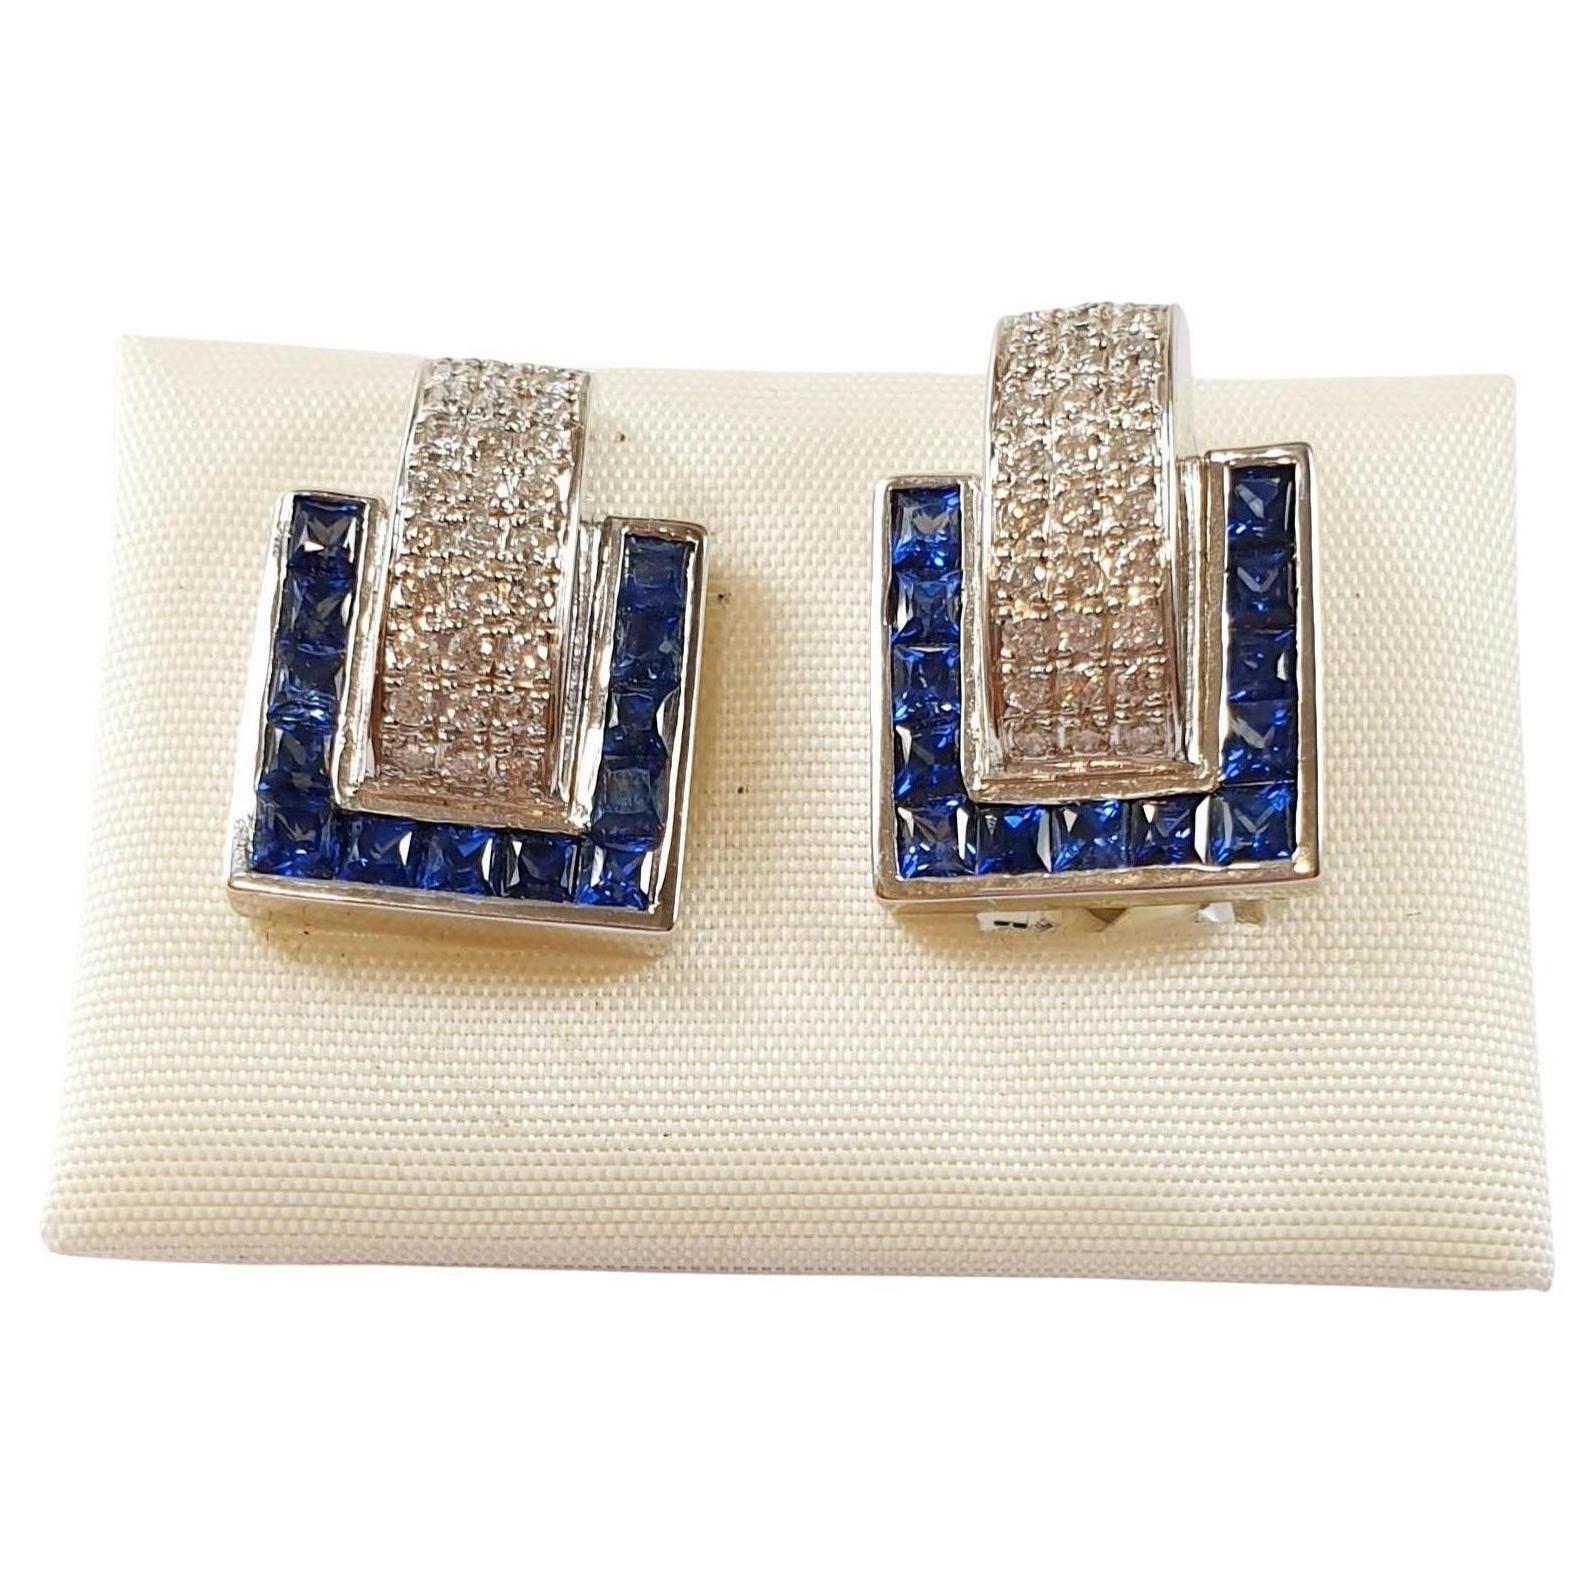 Diamond and Sapphire Hoops Earrings in 18 Karat White Gold 
These pair of 18k white gold hoops earrings weight 5,,7grams each and have o.28ct of diamonds 
Please note that carat weights may slightly vary as each Irama Pradera Jewels creation is